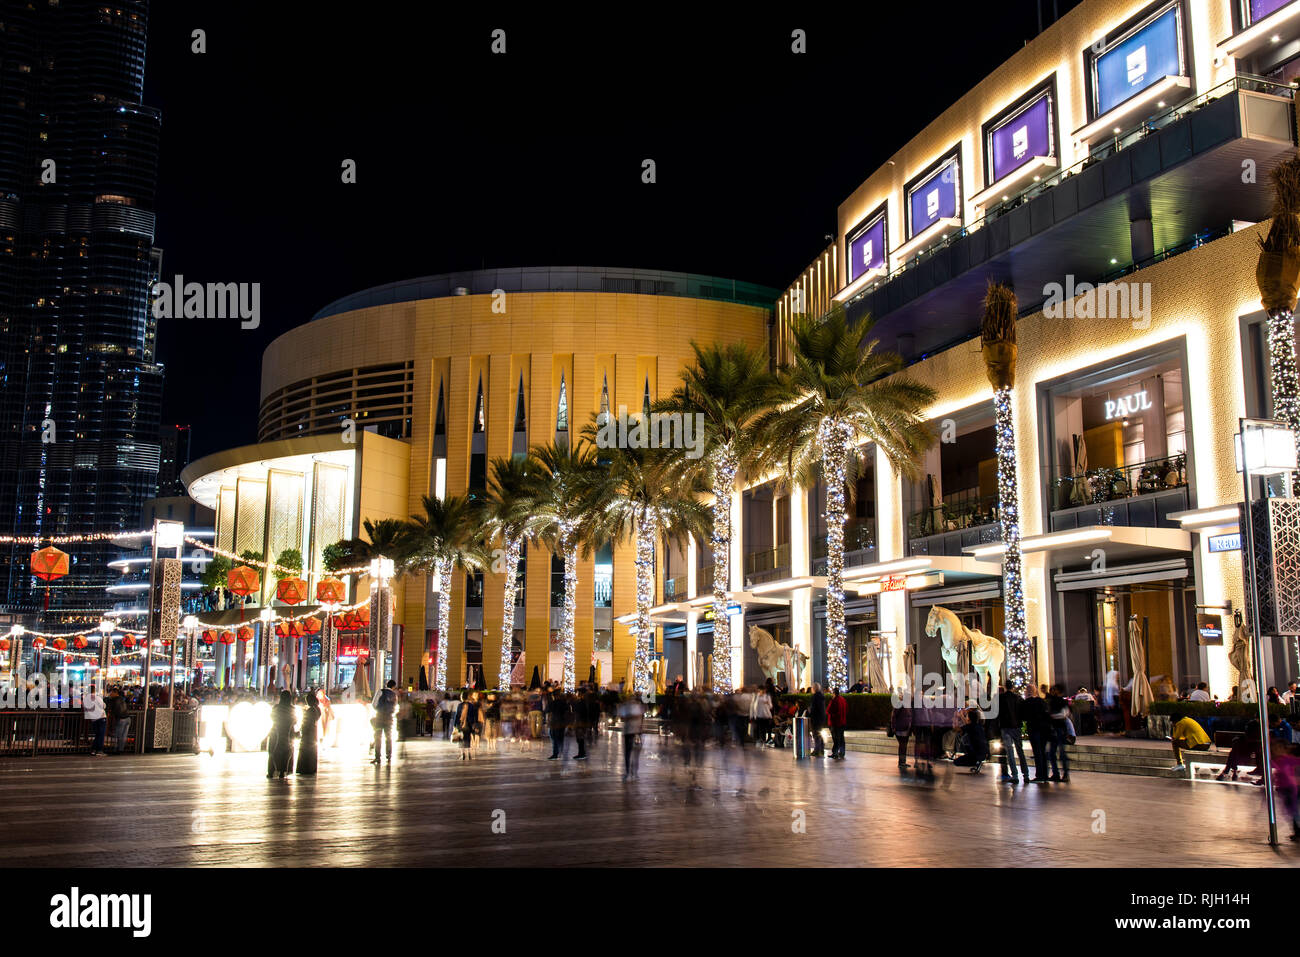 Dubai, United Arab Emirates - February 4, 2018: Crowded Dubai mall outside full with tourists and visitors as one of the main travel attractions in Du Stock Photo